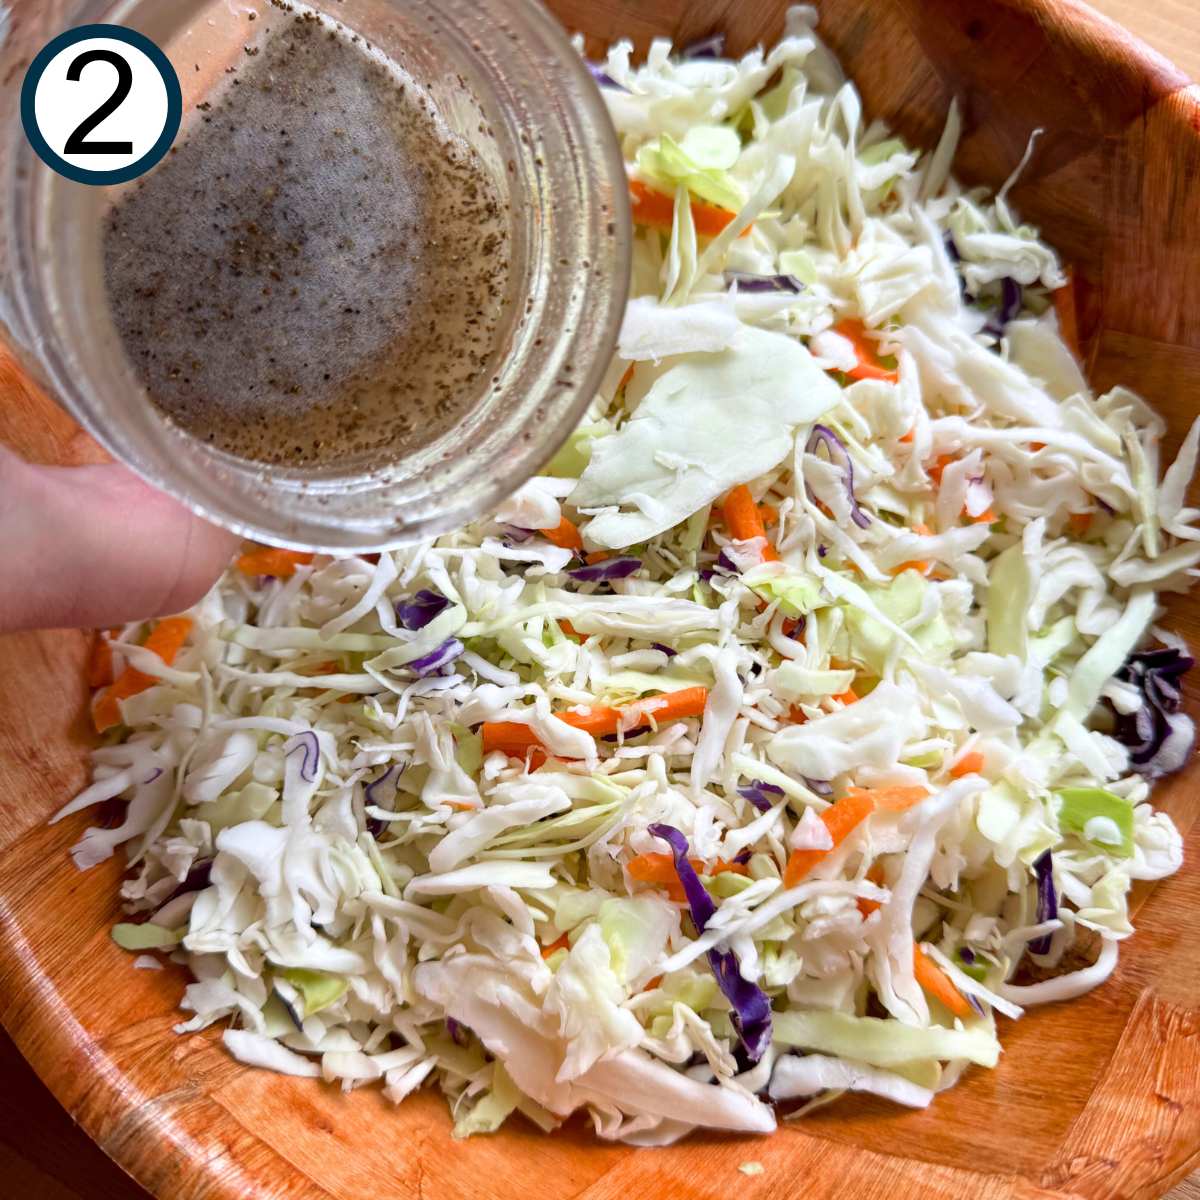 Vinegar dressing being poured over shredded cabbage and carrots.